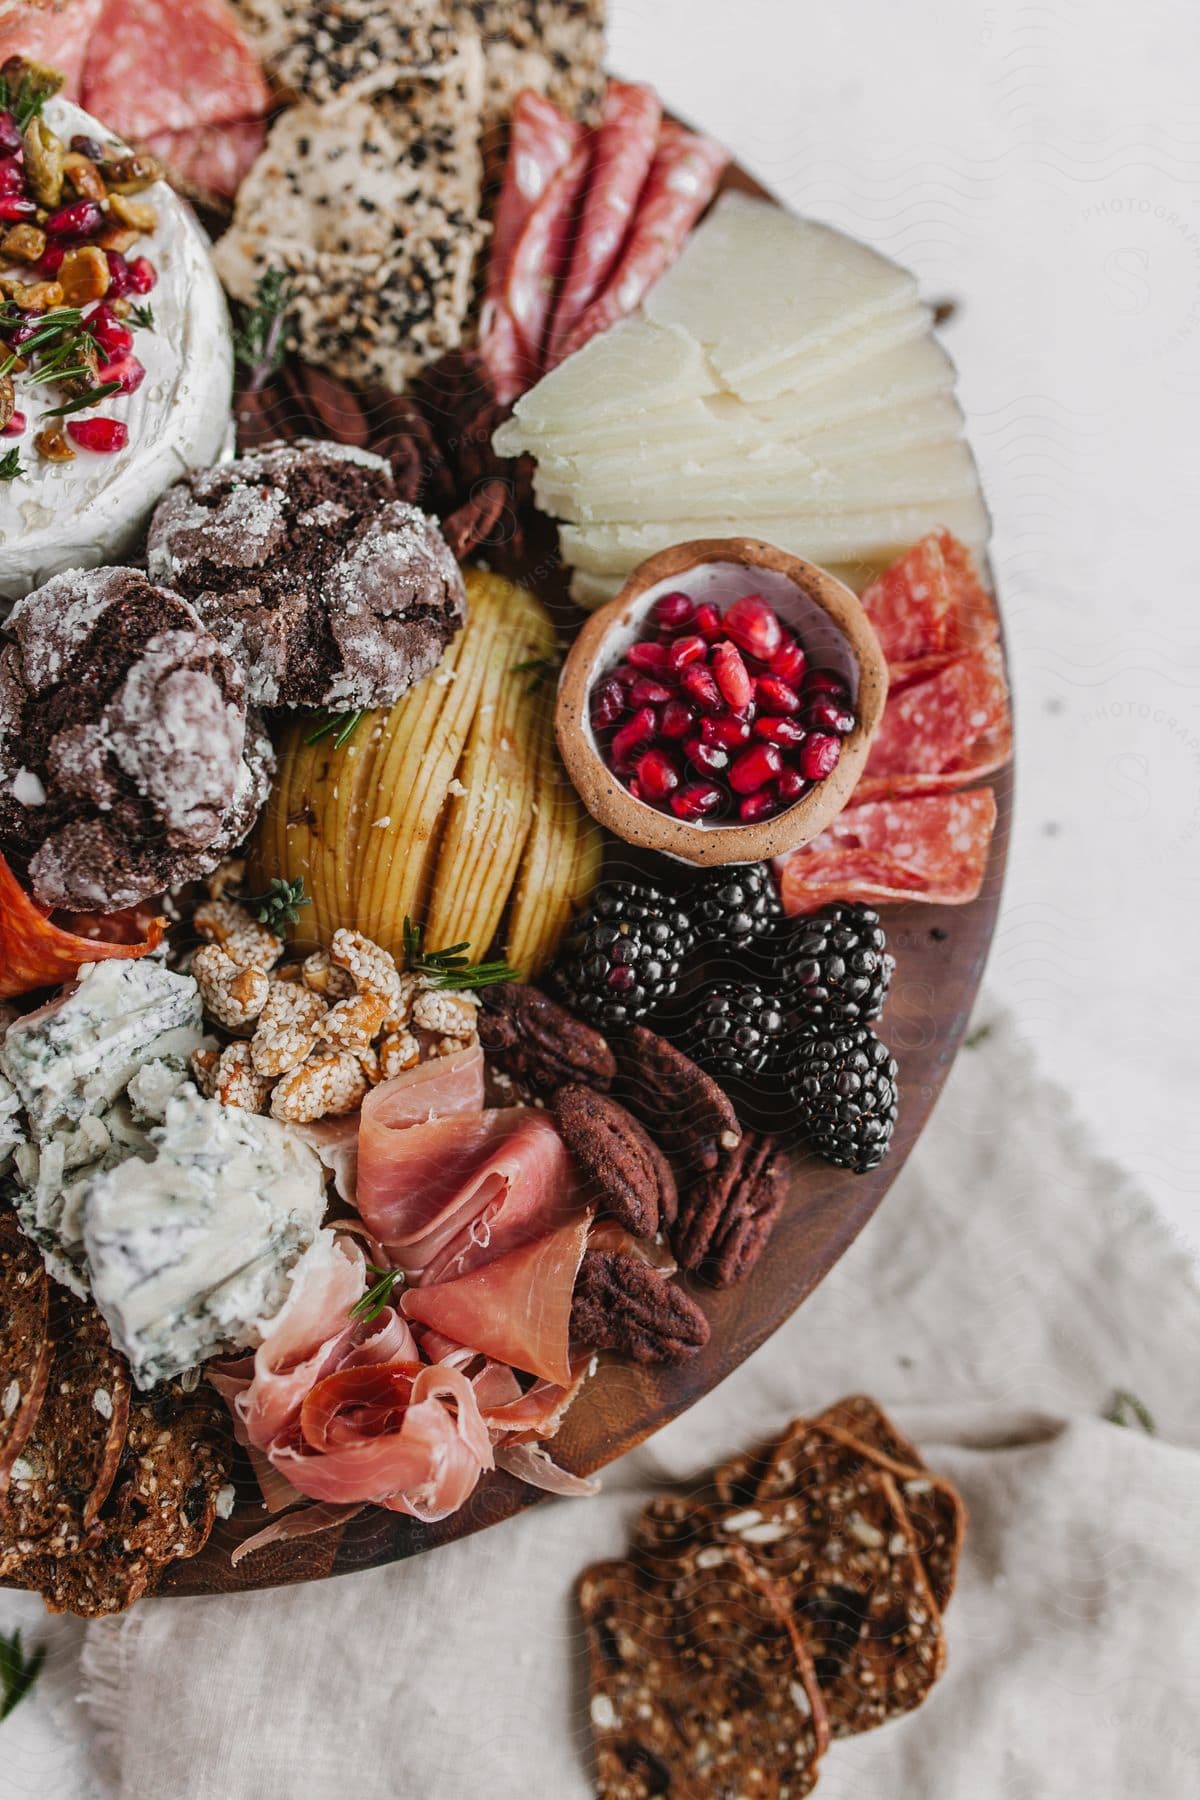 A charcuterie board filled with a variety of meats cheeses and fruits